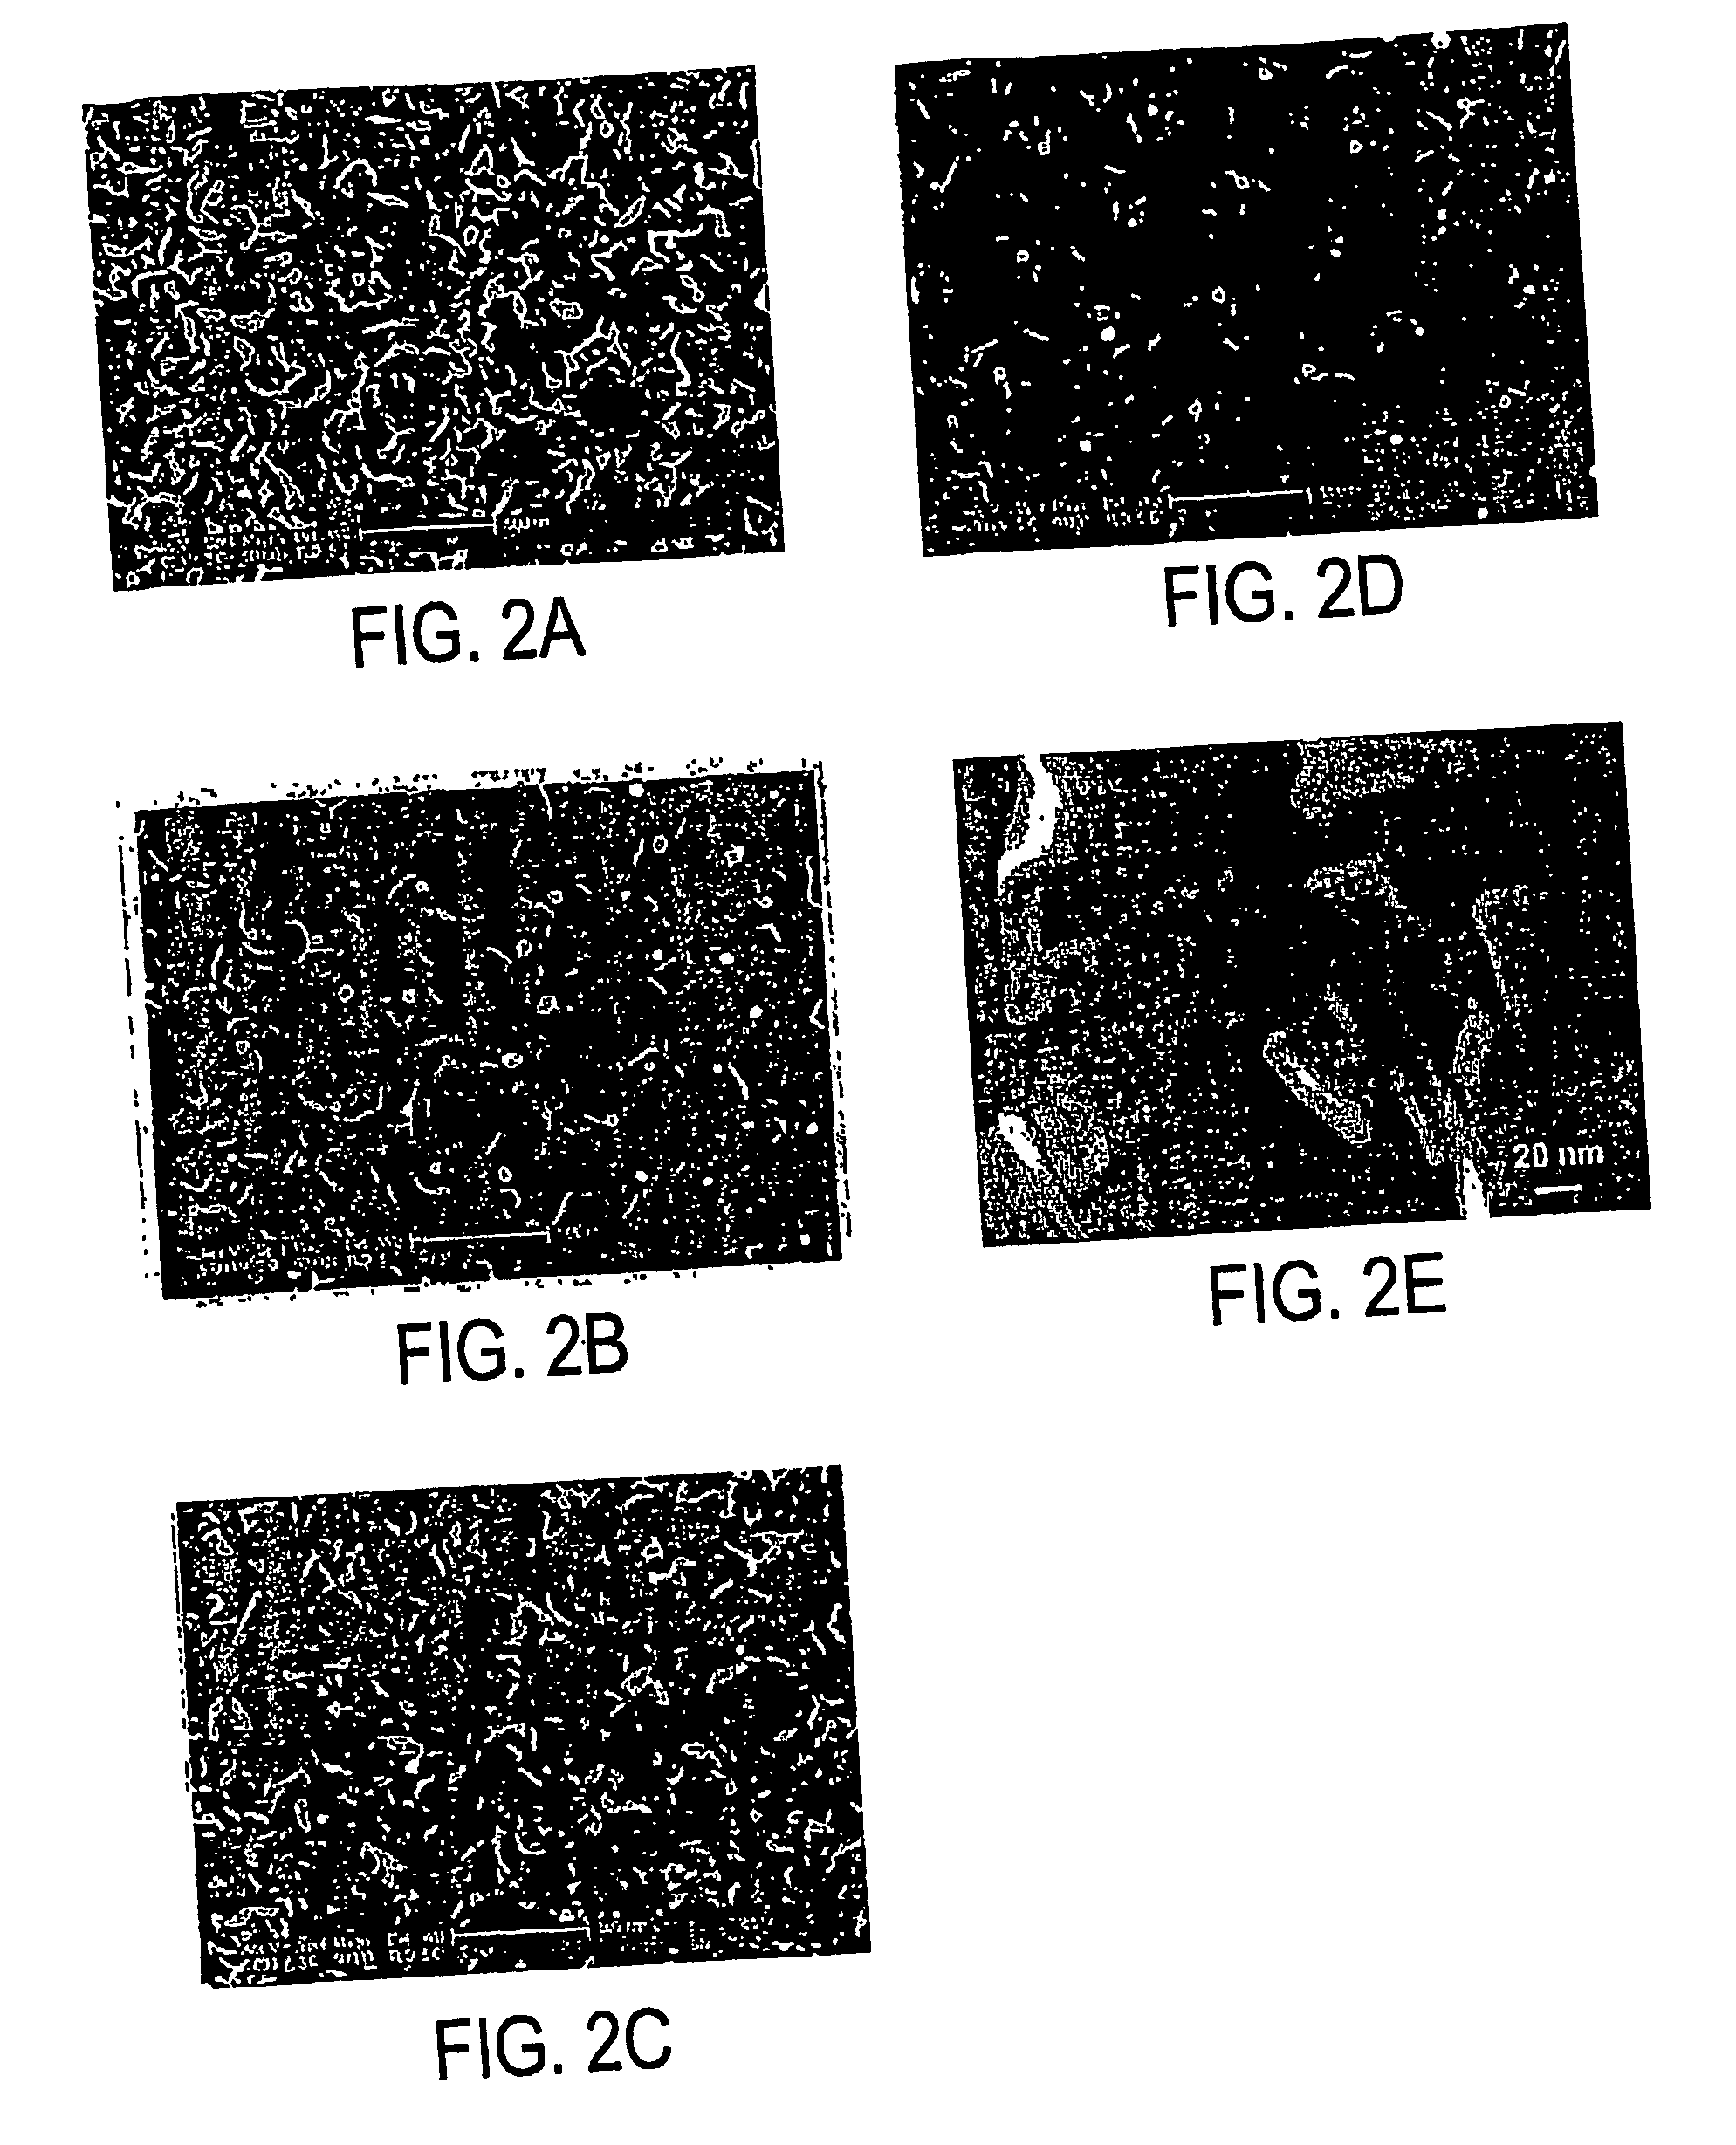 Carbon nanostructures and methods of making and using the same